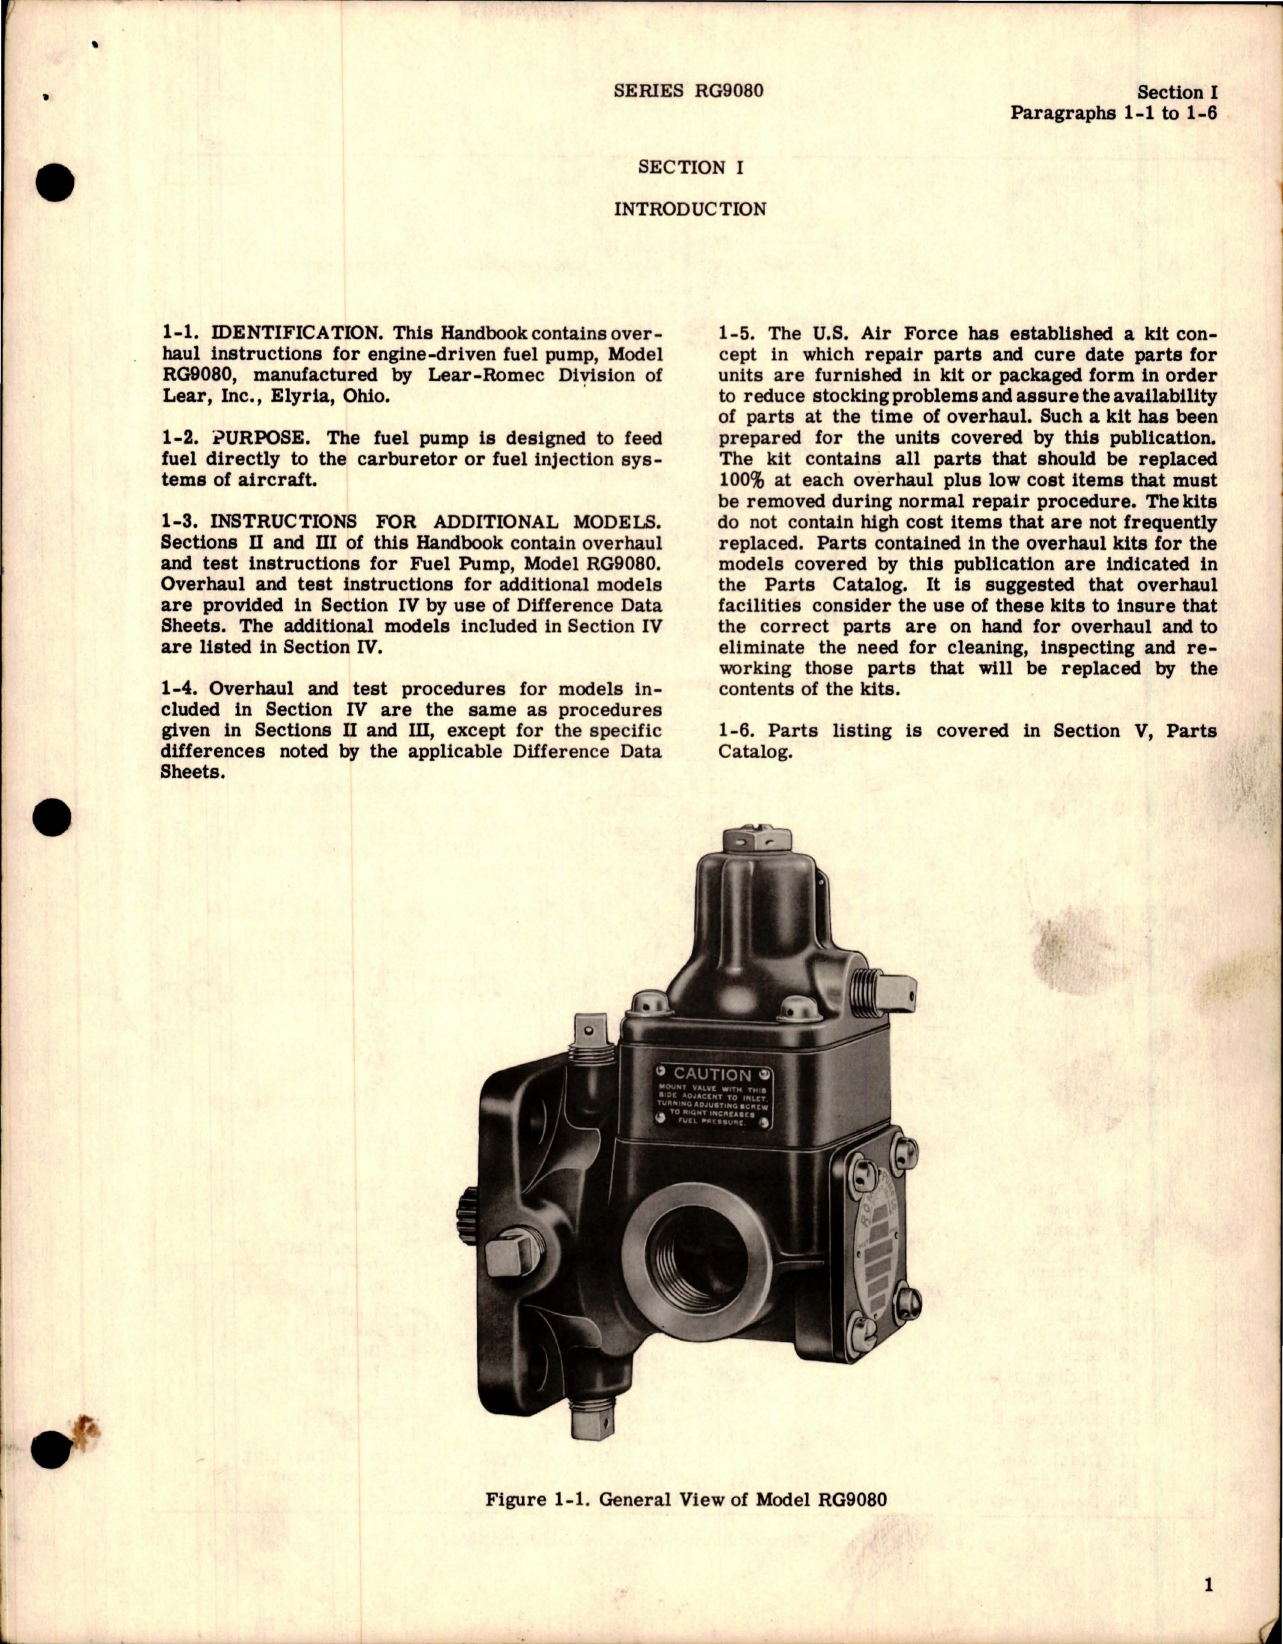 Sample page 5 from AirCorps Library document: Overhaul Instructions with Parts Catalog for Engine Driven Fuel Pump - Series RG9080 